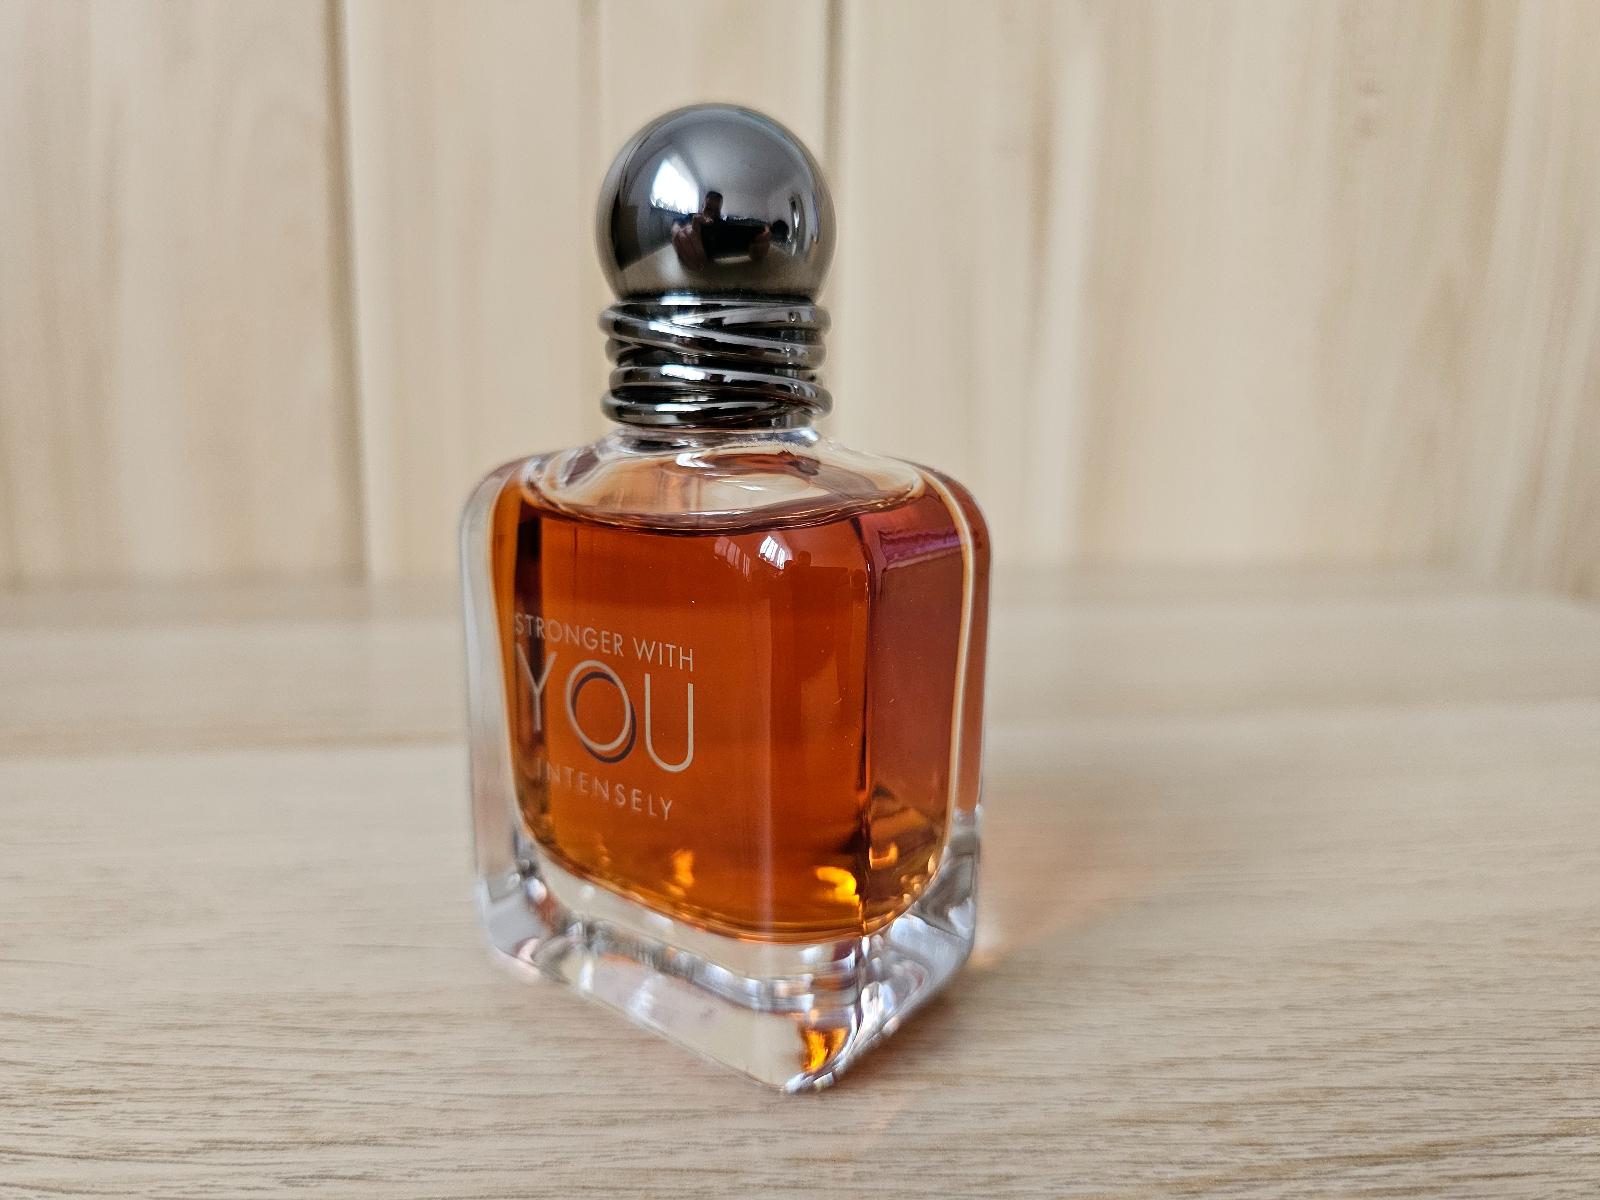 Armani stronger with you Intensely 50ml - Vône